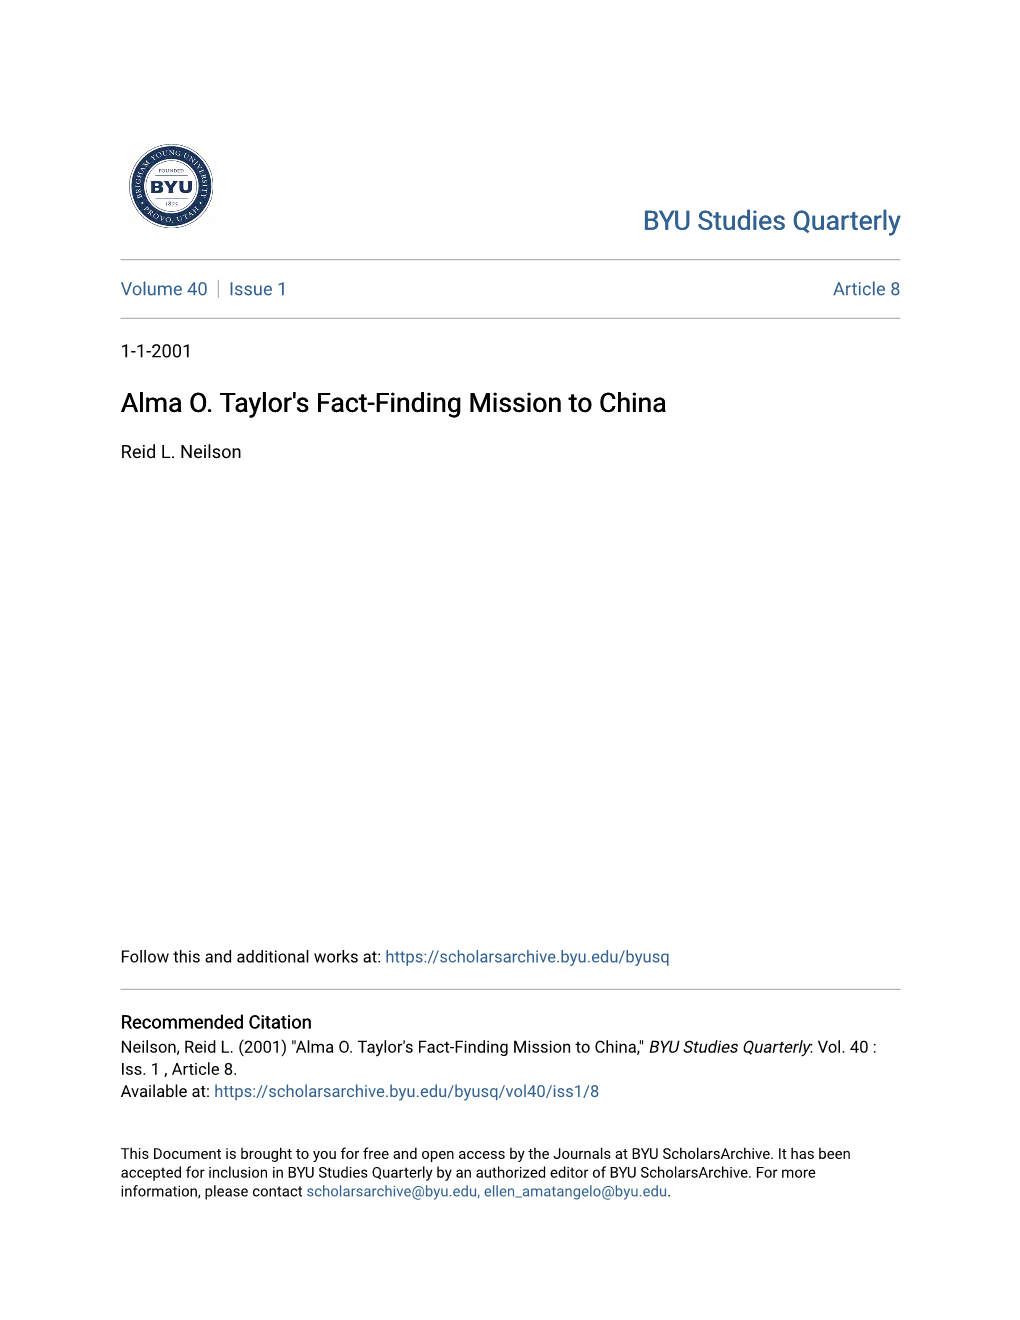 Alma O. Taylor's Fact-Finding Mission to China